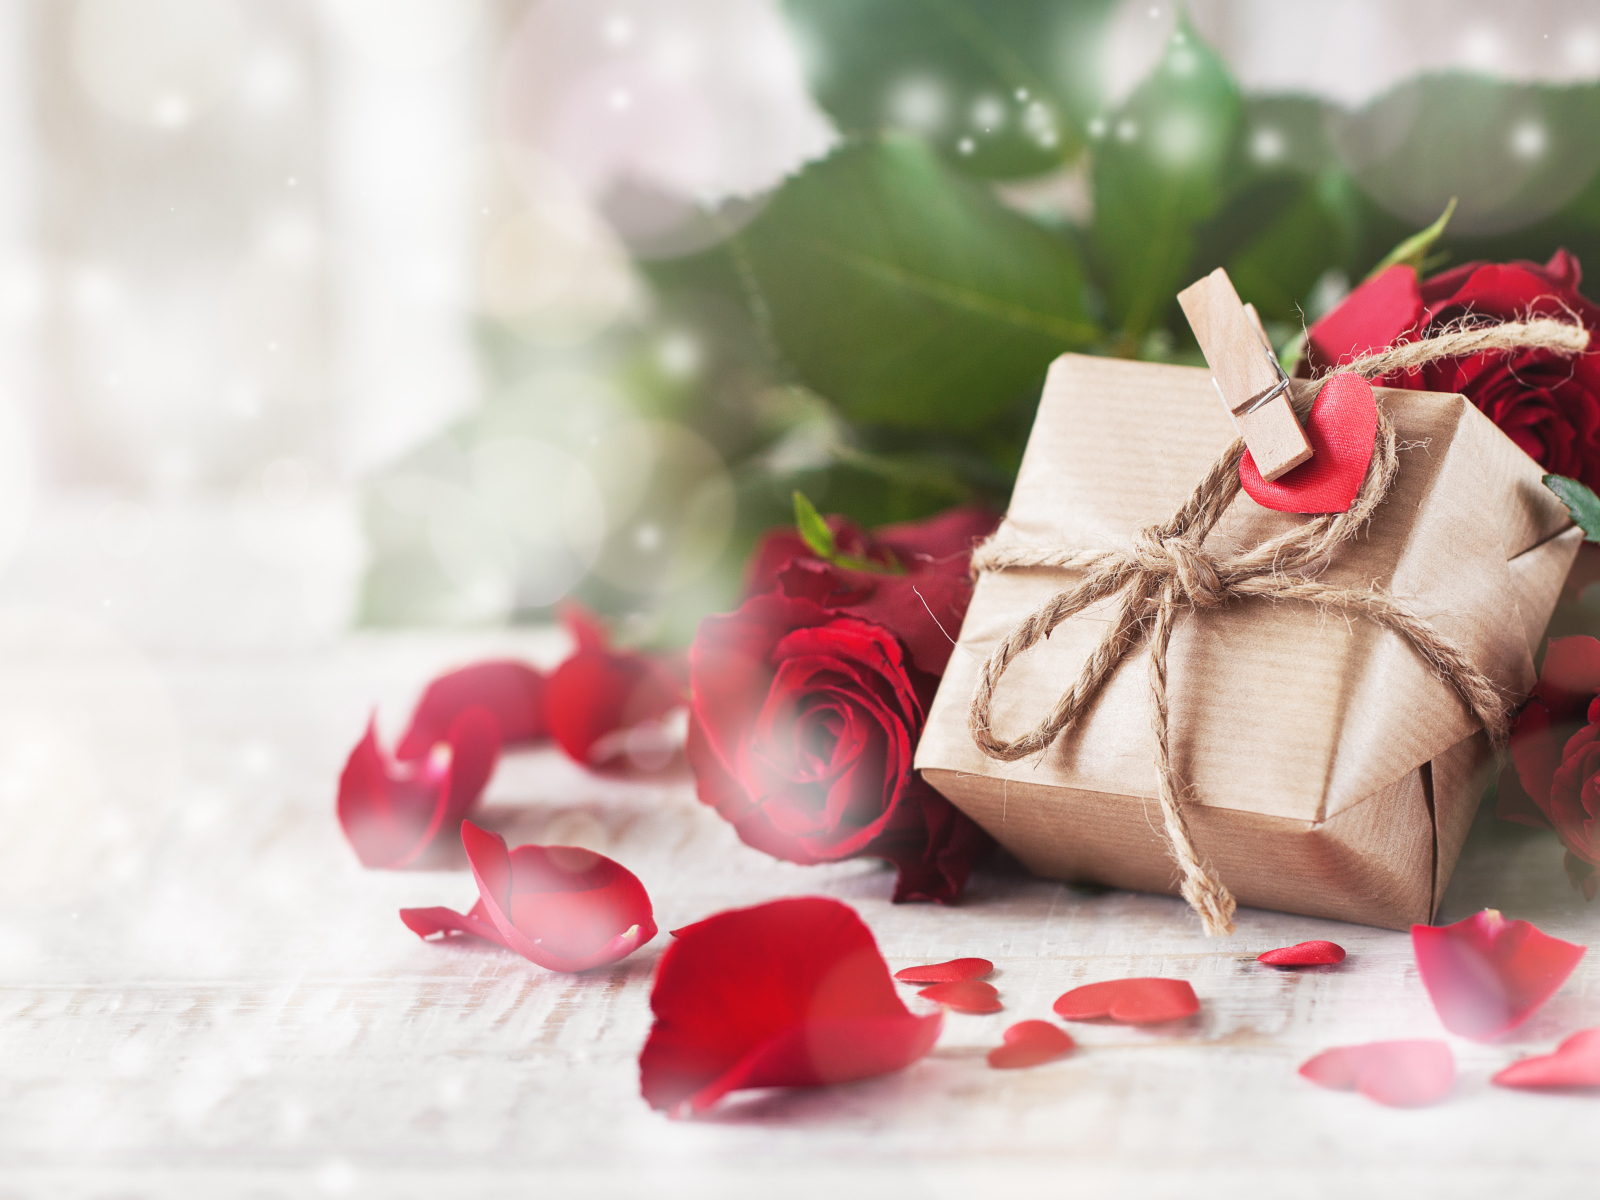 A gift in a box on a table with red roses